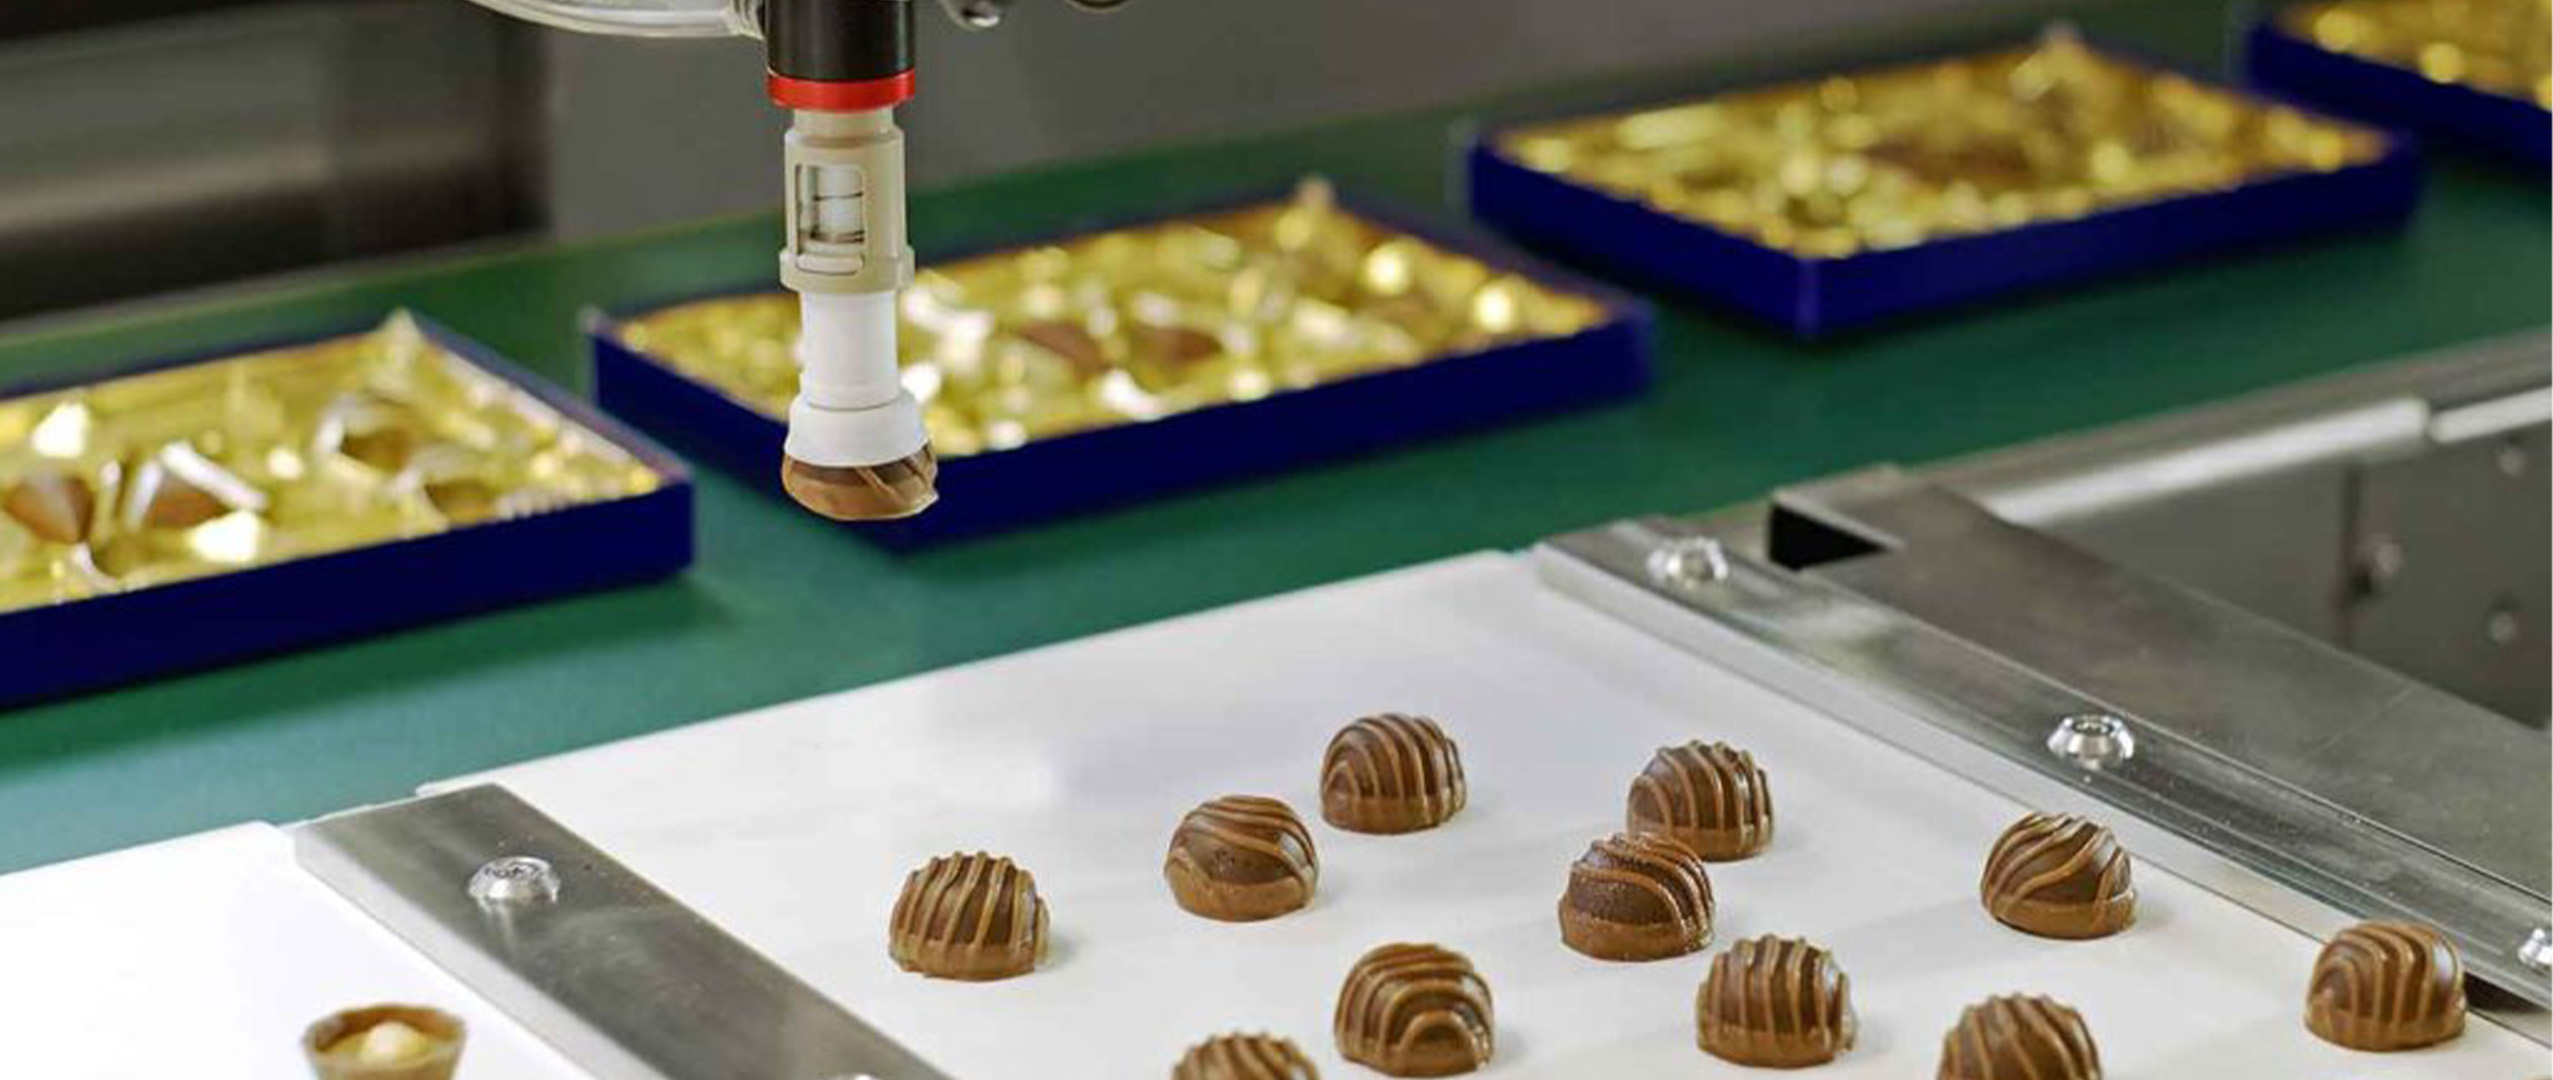 Pralines that are picked and placed in a blister by a Delta robot from Demaurex.